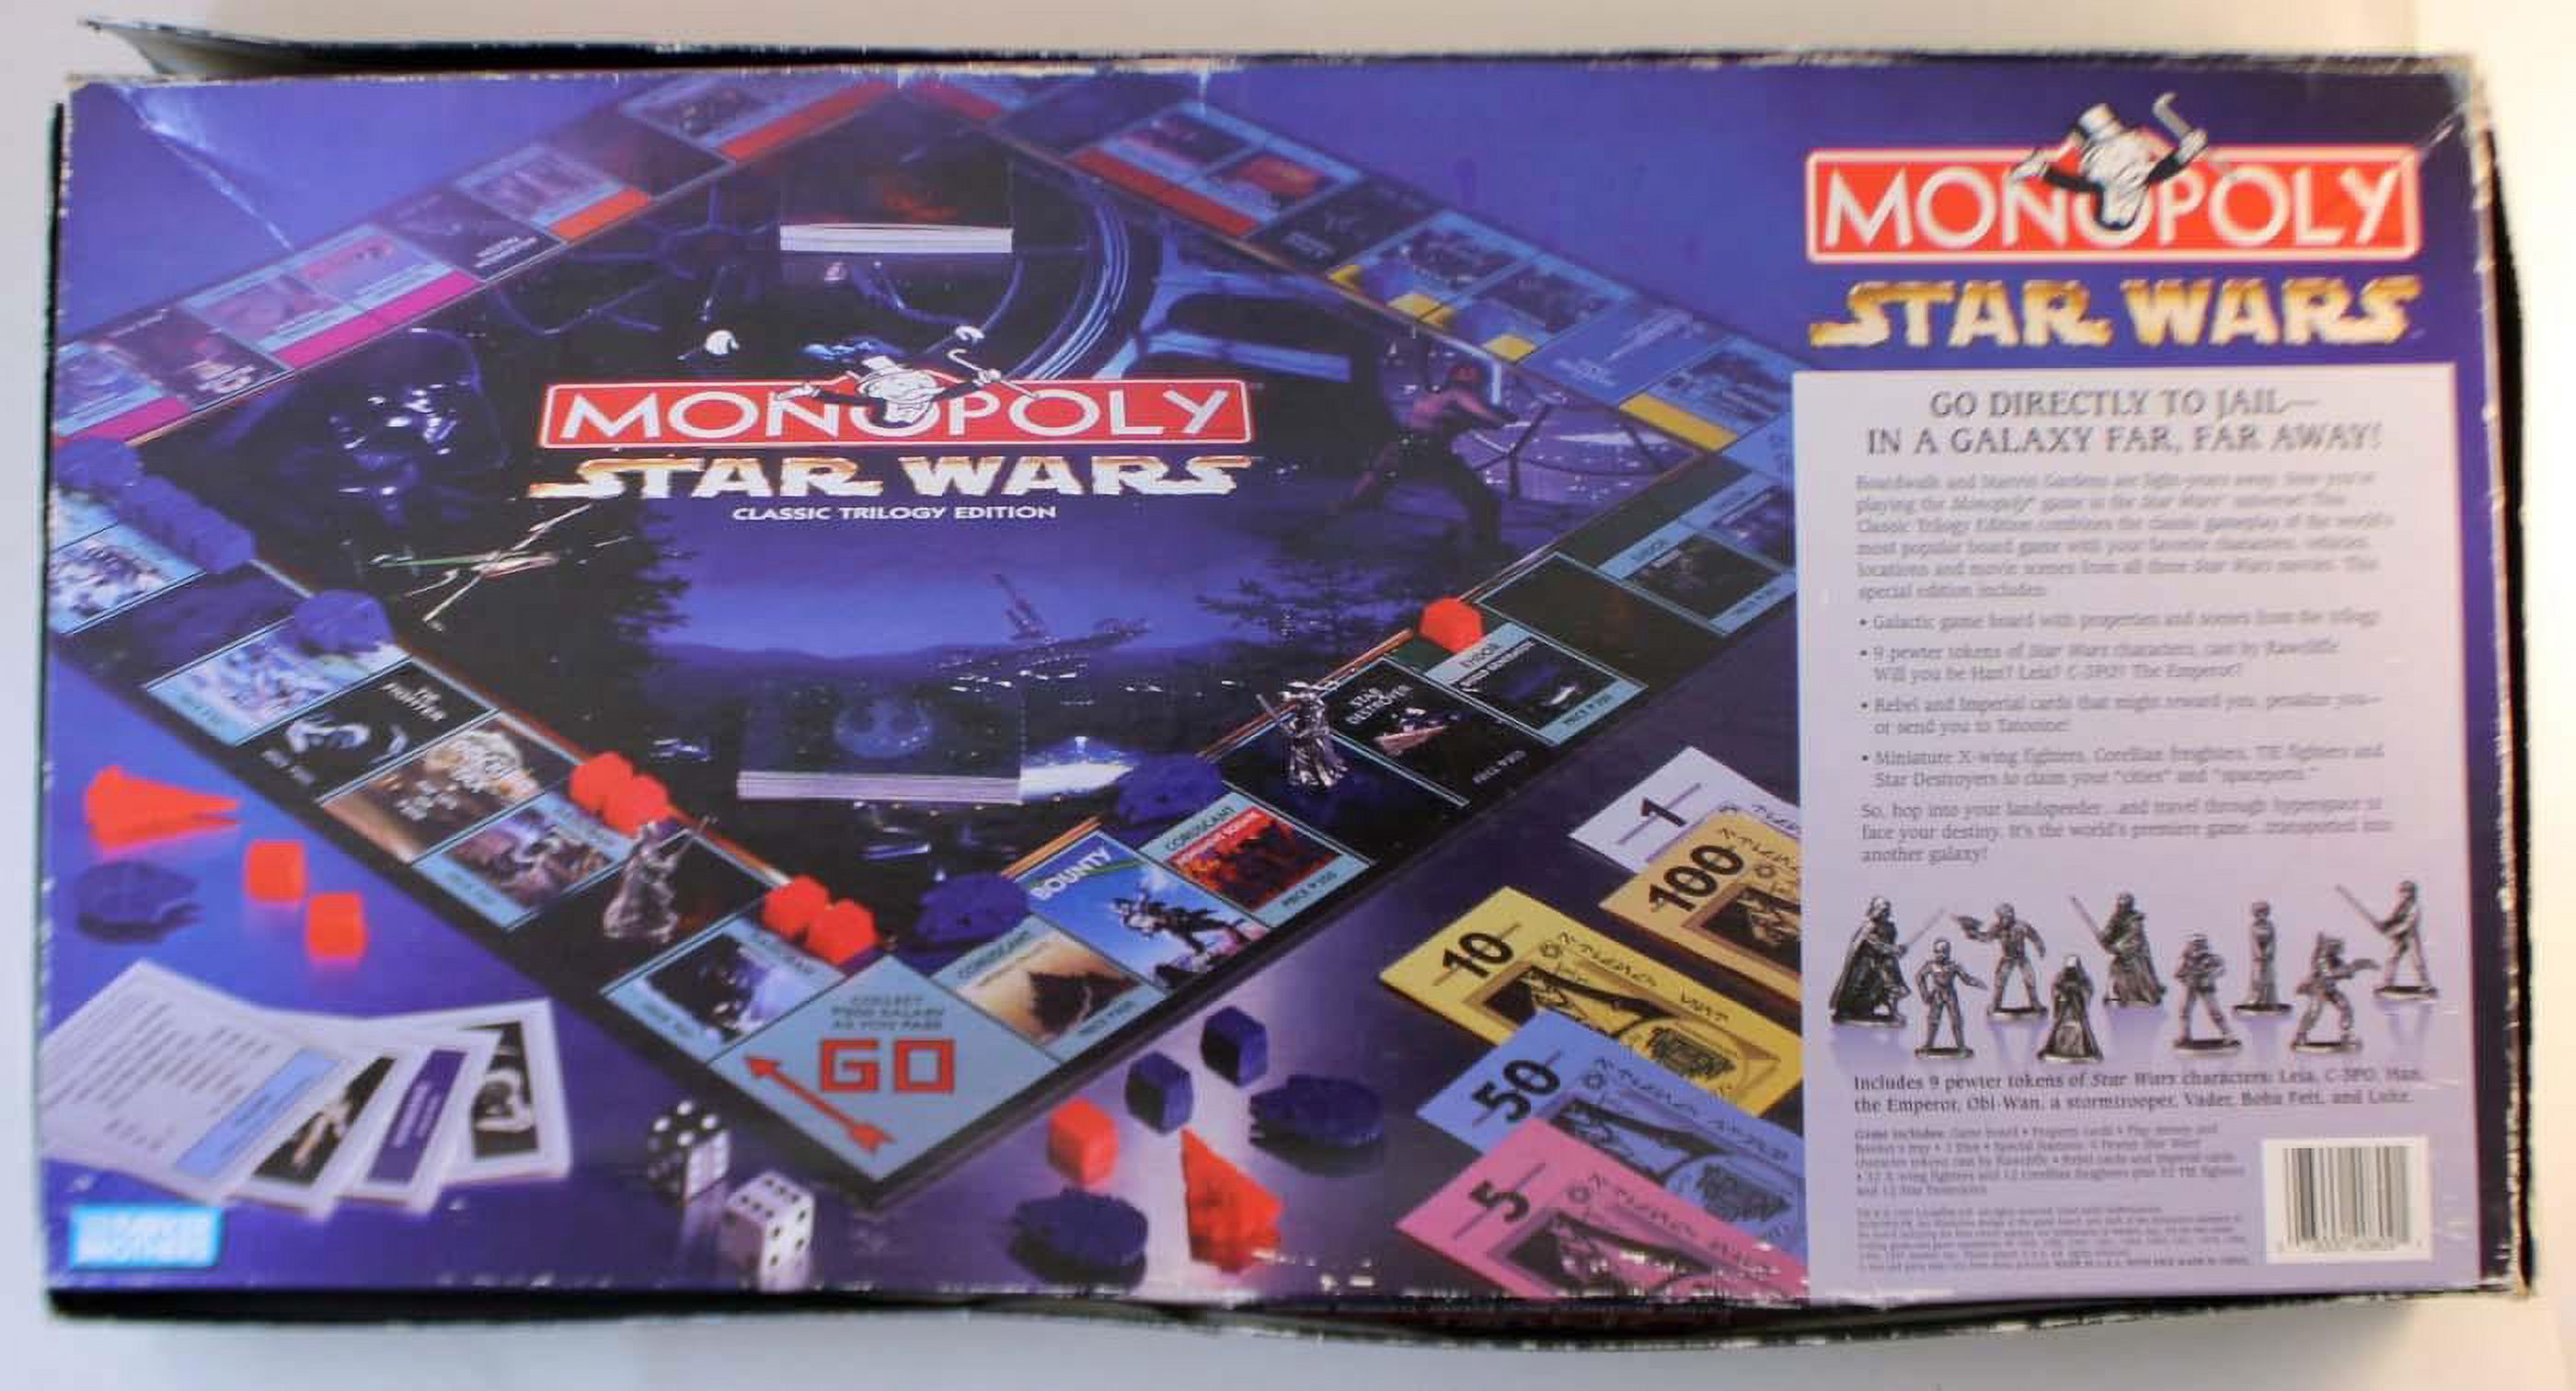 Star Wars Monopoly - Classic Trilogy Edition VG/EX - image 2 of 2